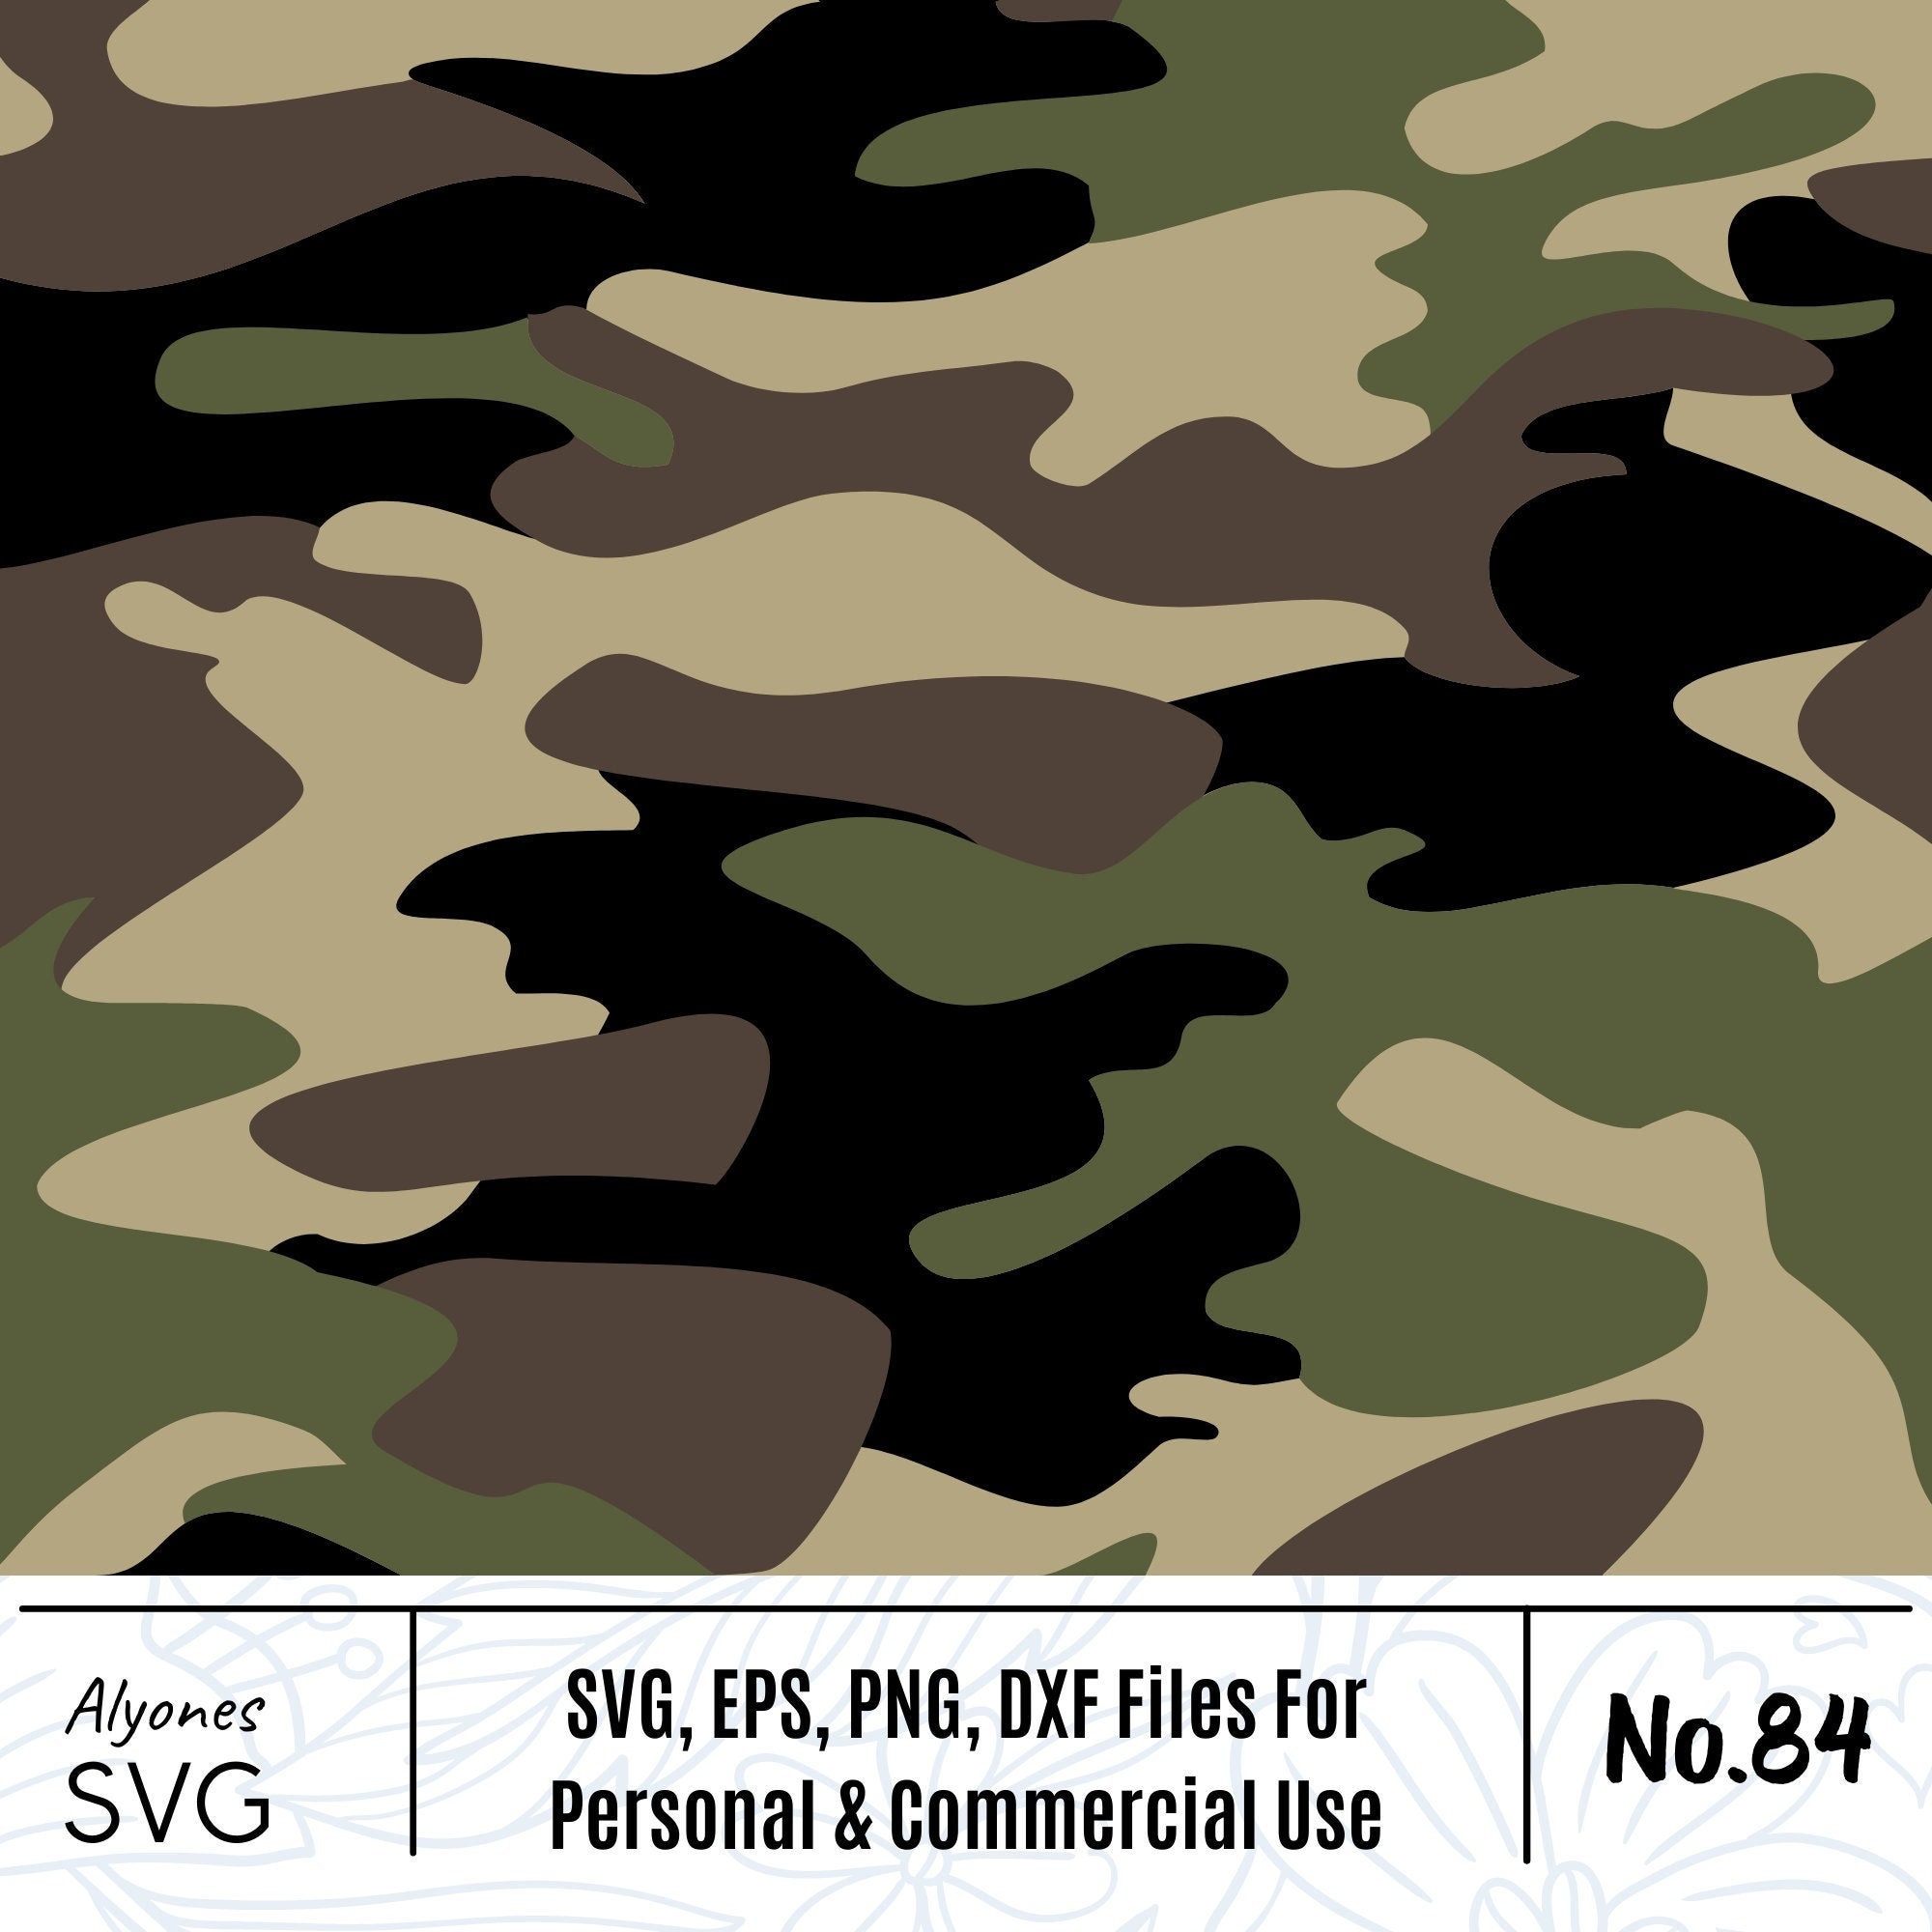 MULTICAM. Camo Stencils and Paint Kit - Camosavage